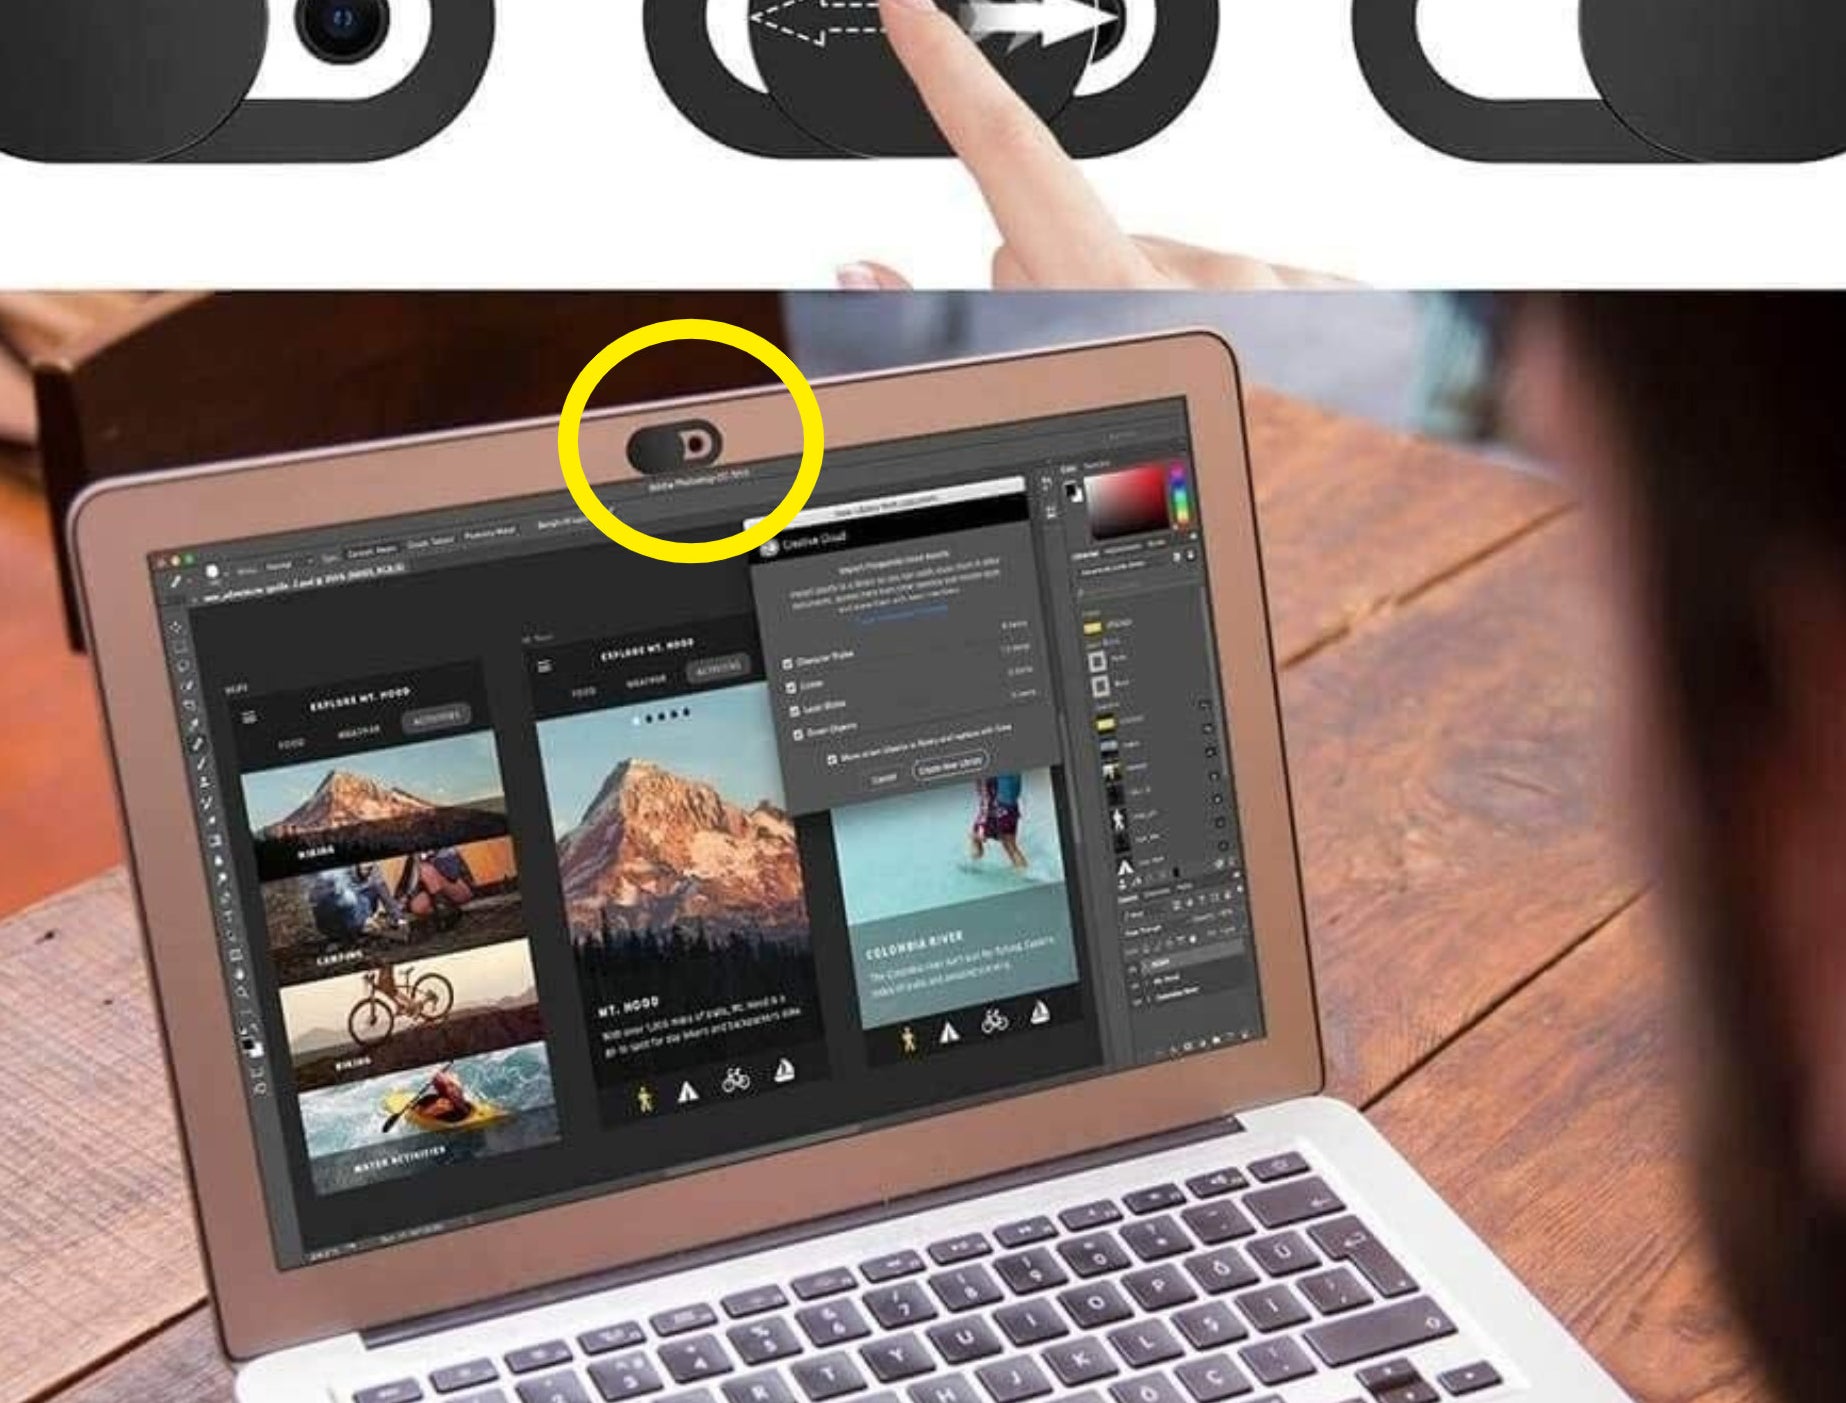 A person using their laptop that has a webcam cover over their camera